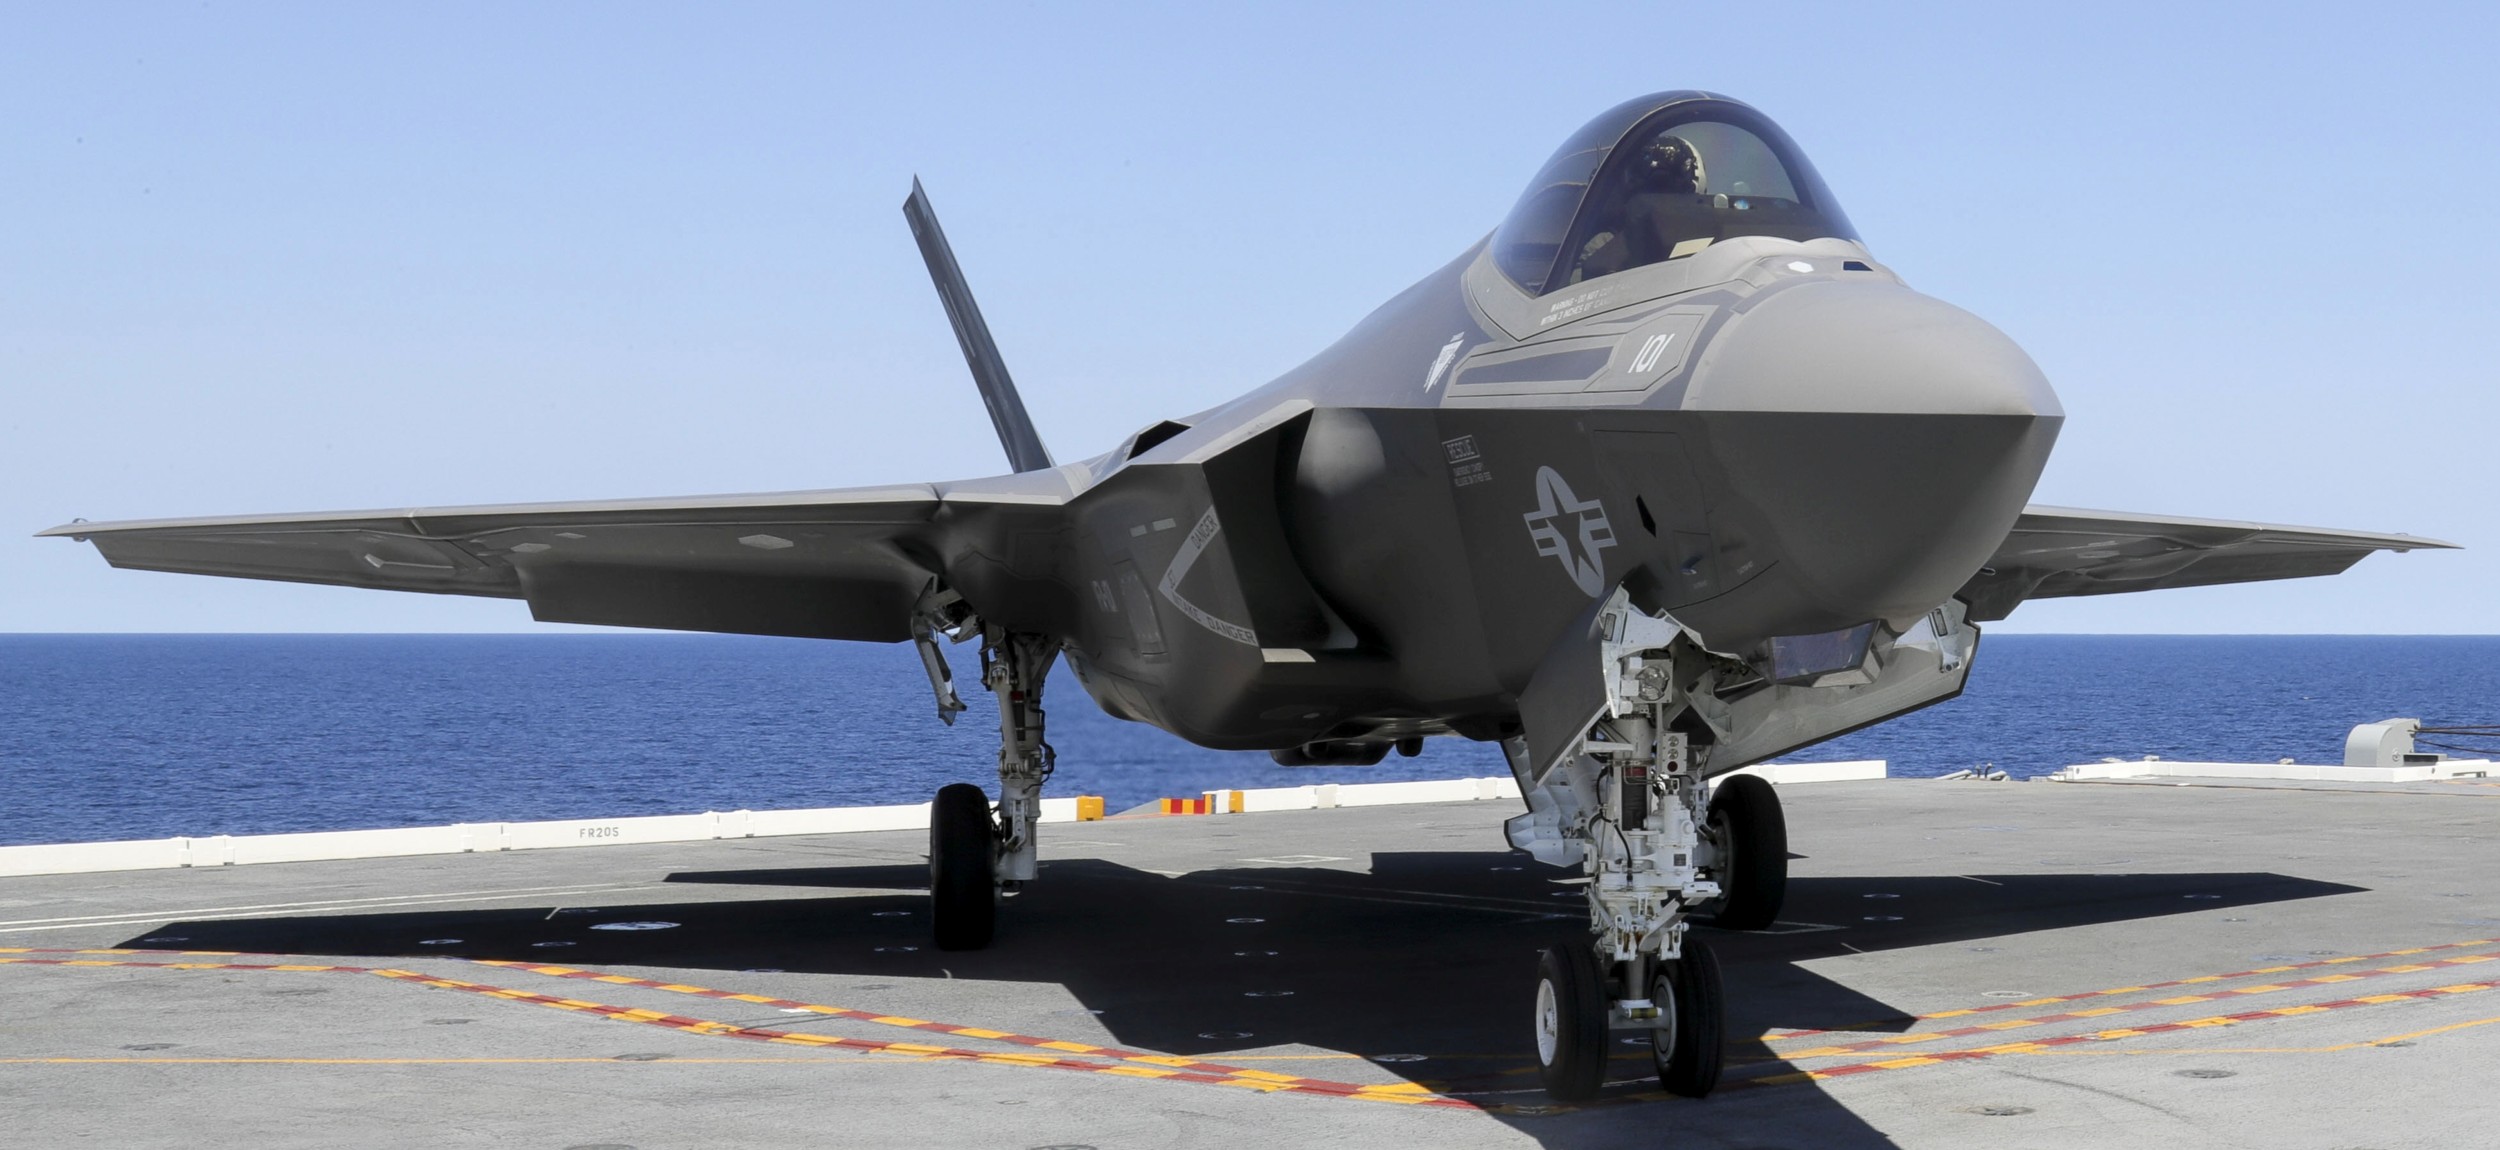 vfa-101 grim reapers strike fighter squadron us navy f-35c lightning jsf frs 27 uss abraham lincoln cvn-72